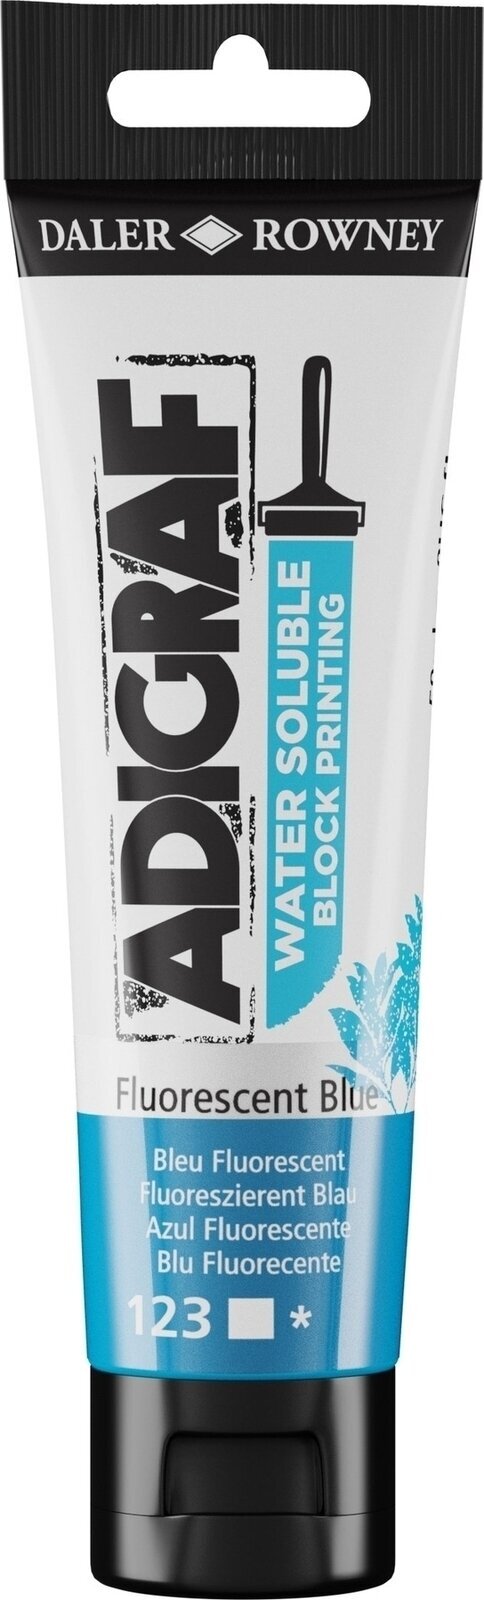 Paint For Linocut Daler Rowney Adigraf Block Printing Water Soluble Colour Paint For Linocut Fluorescent Blue 59 ml